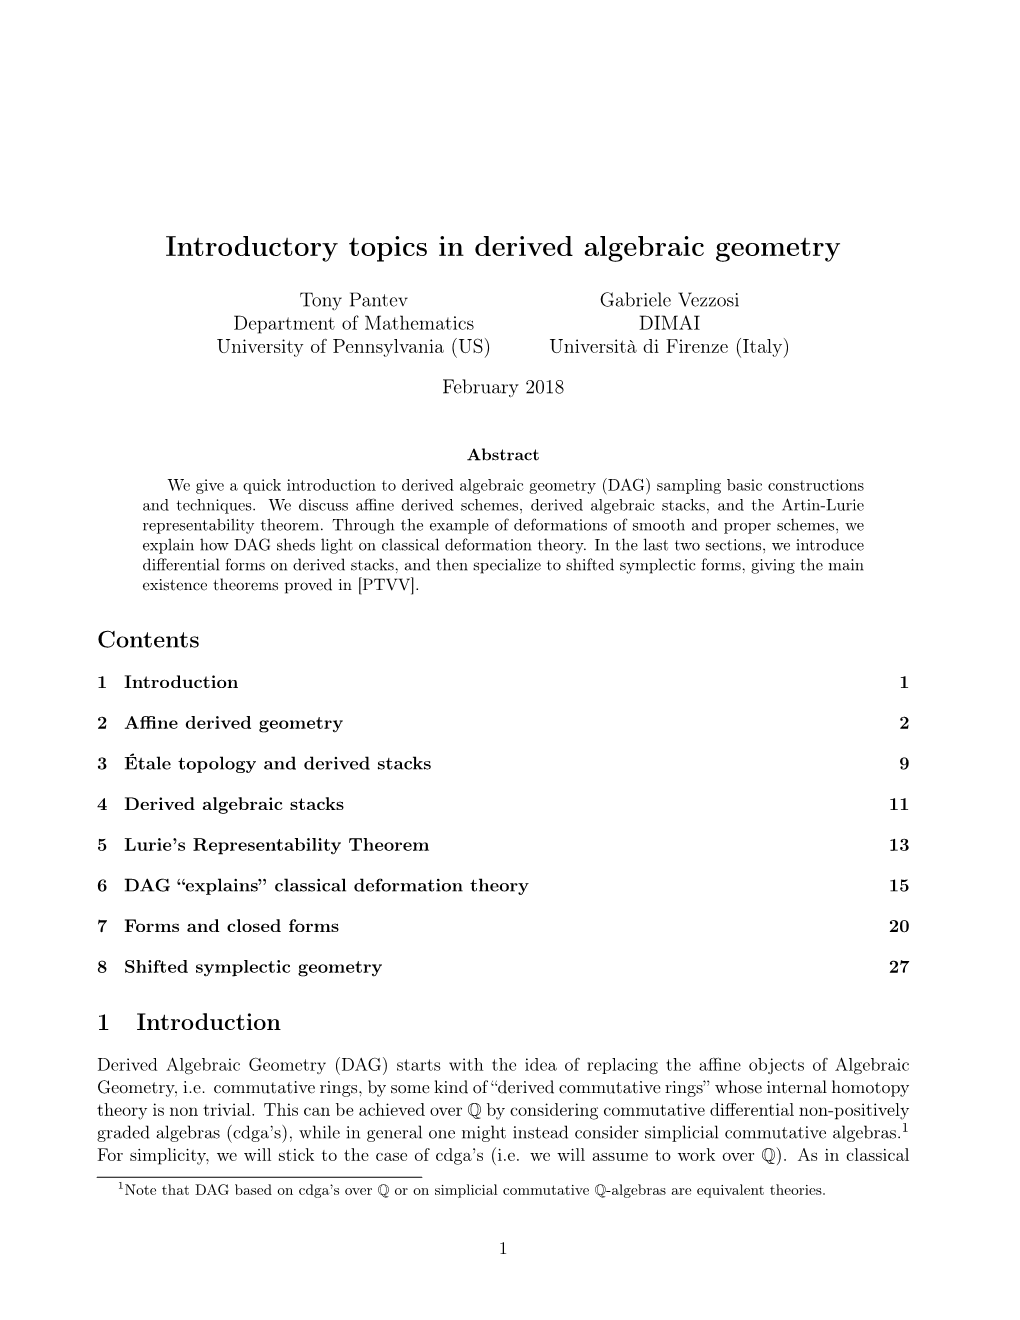 Introductory Topics in Derived Algebraic Geometry